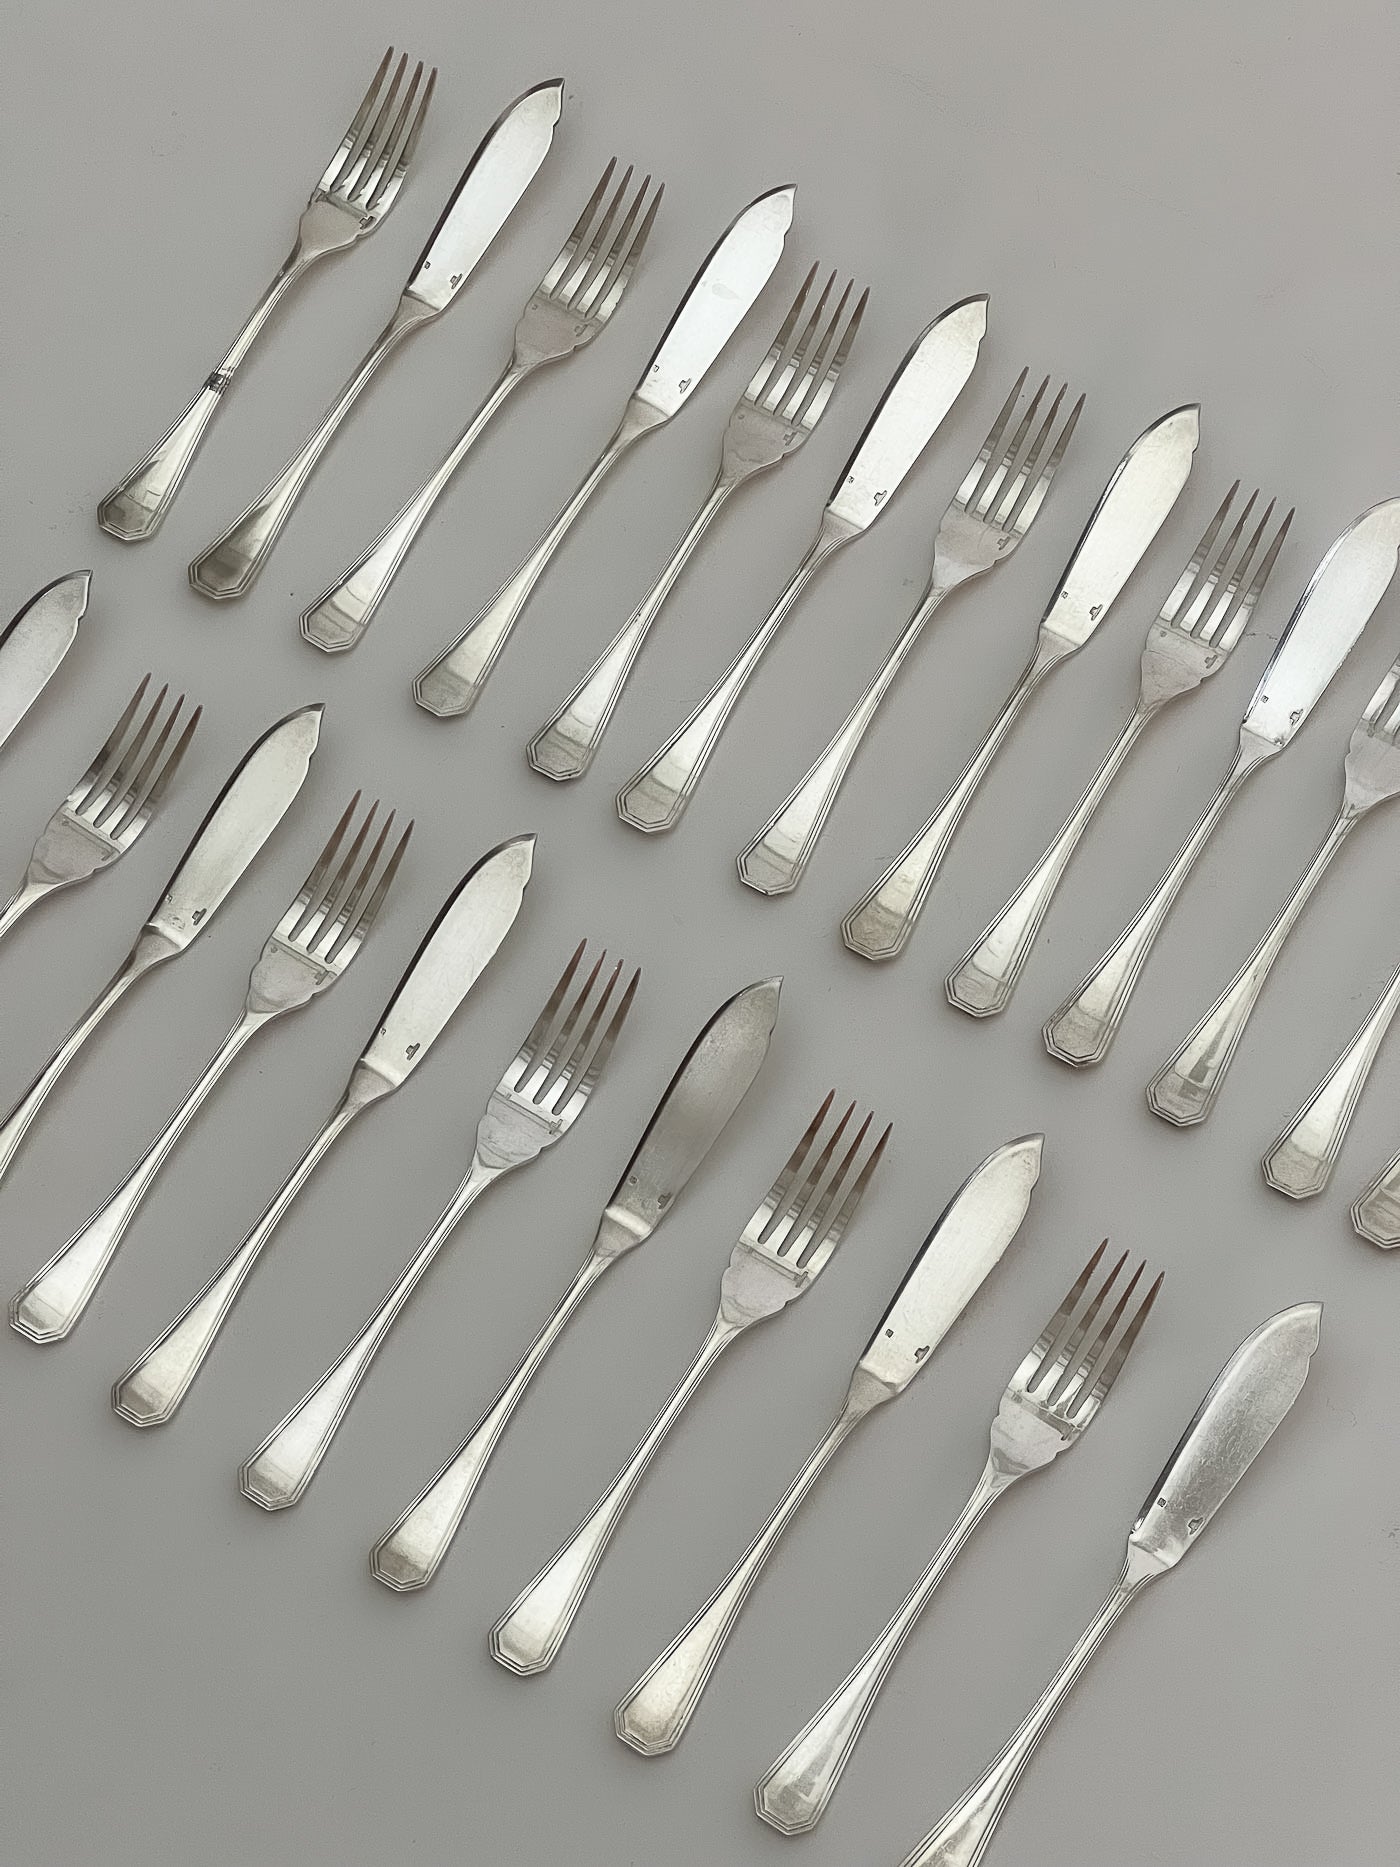 Christofle fish cutlery 24 pieces